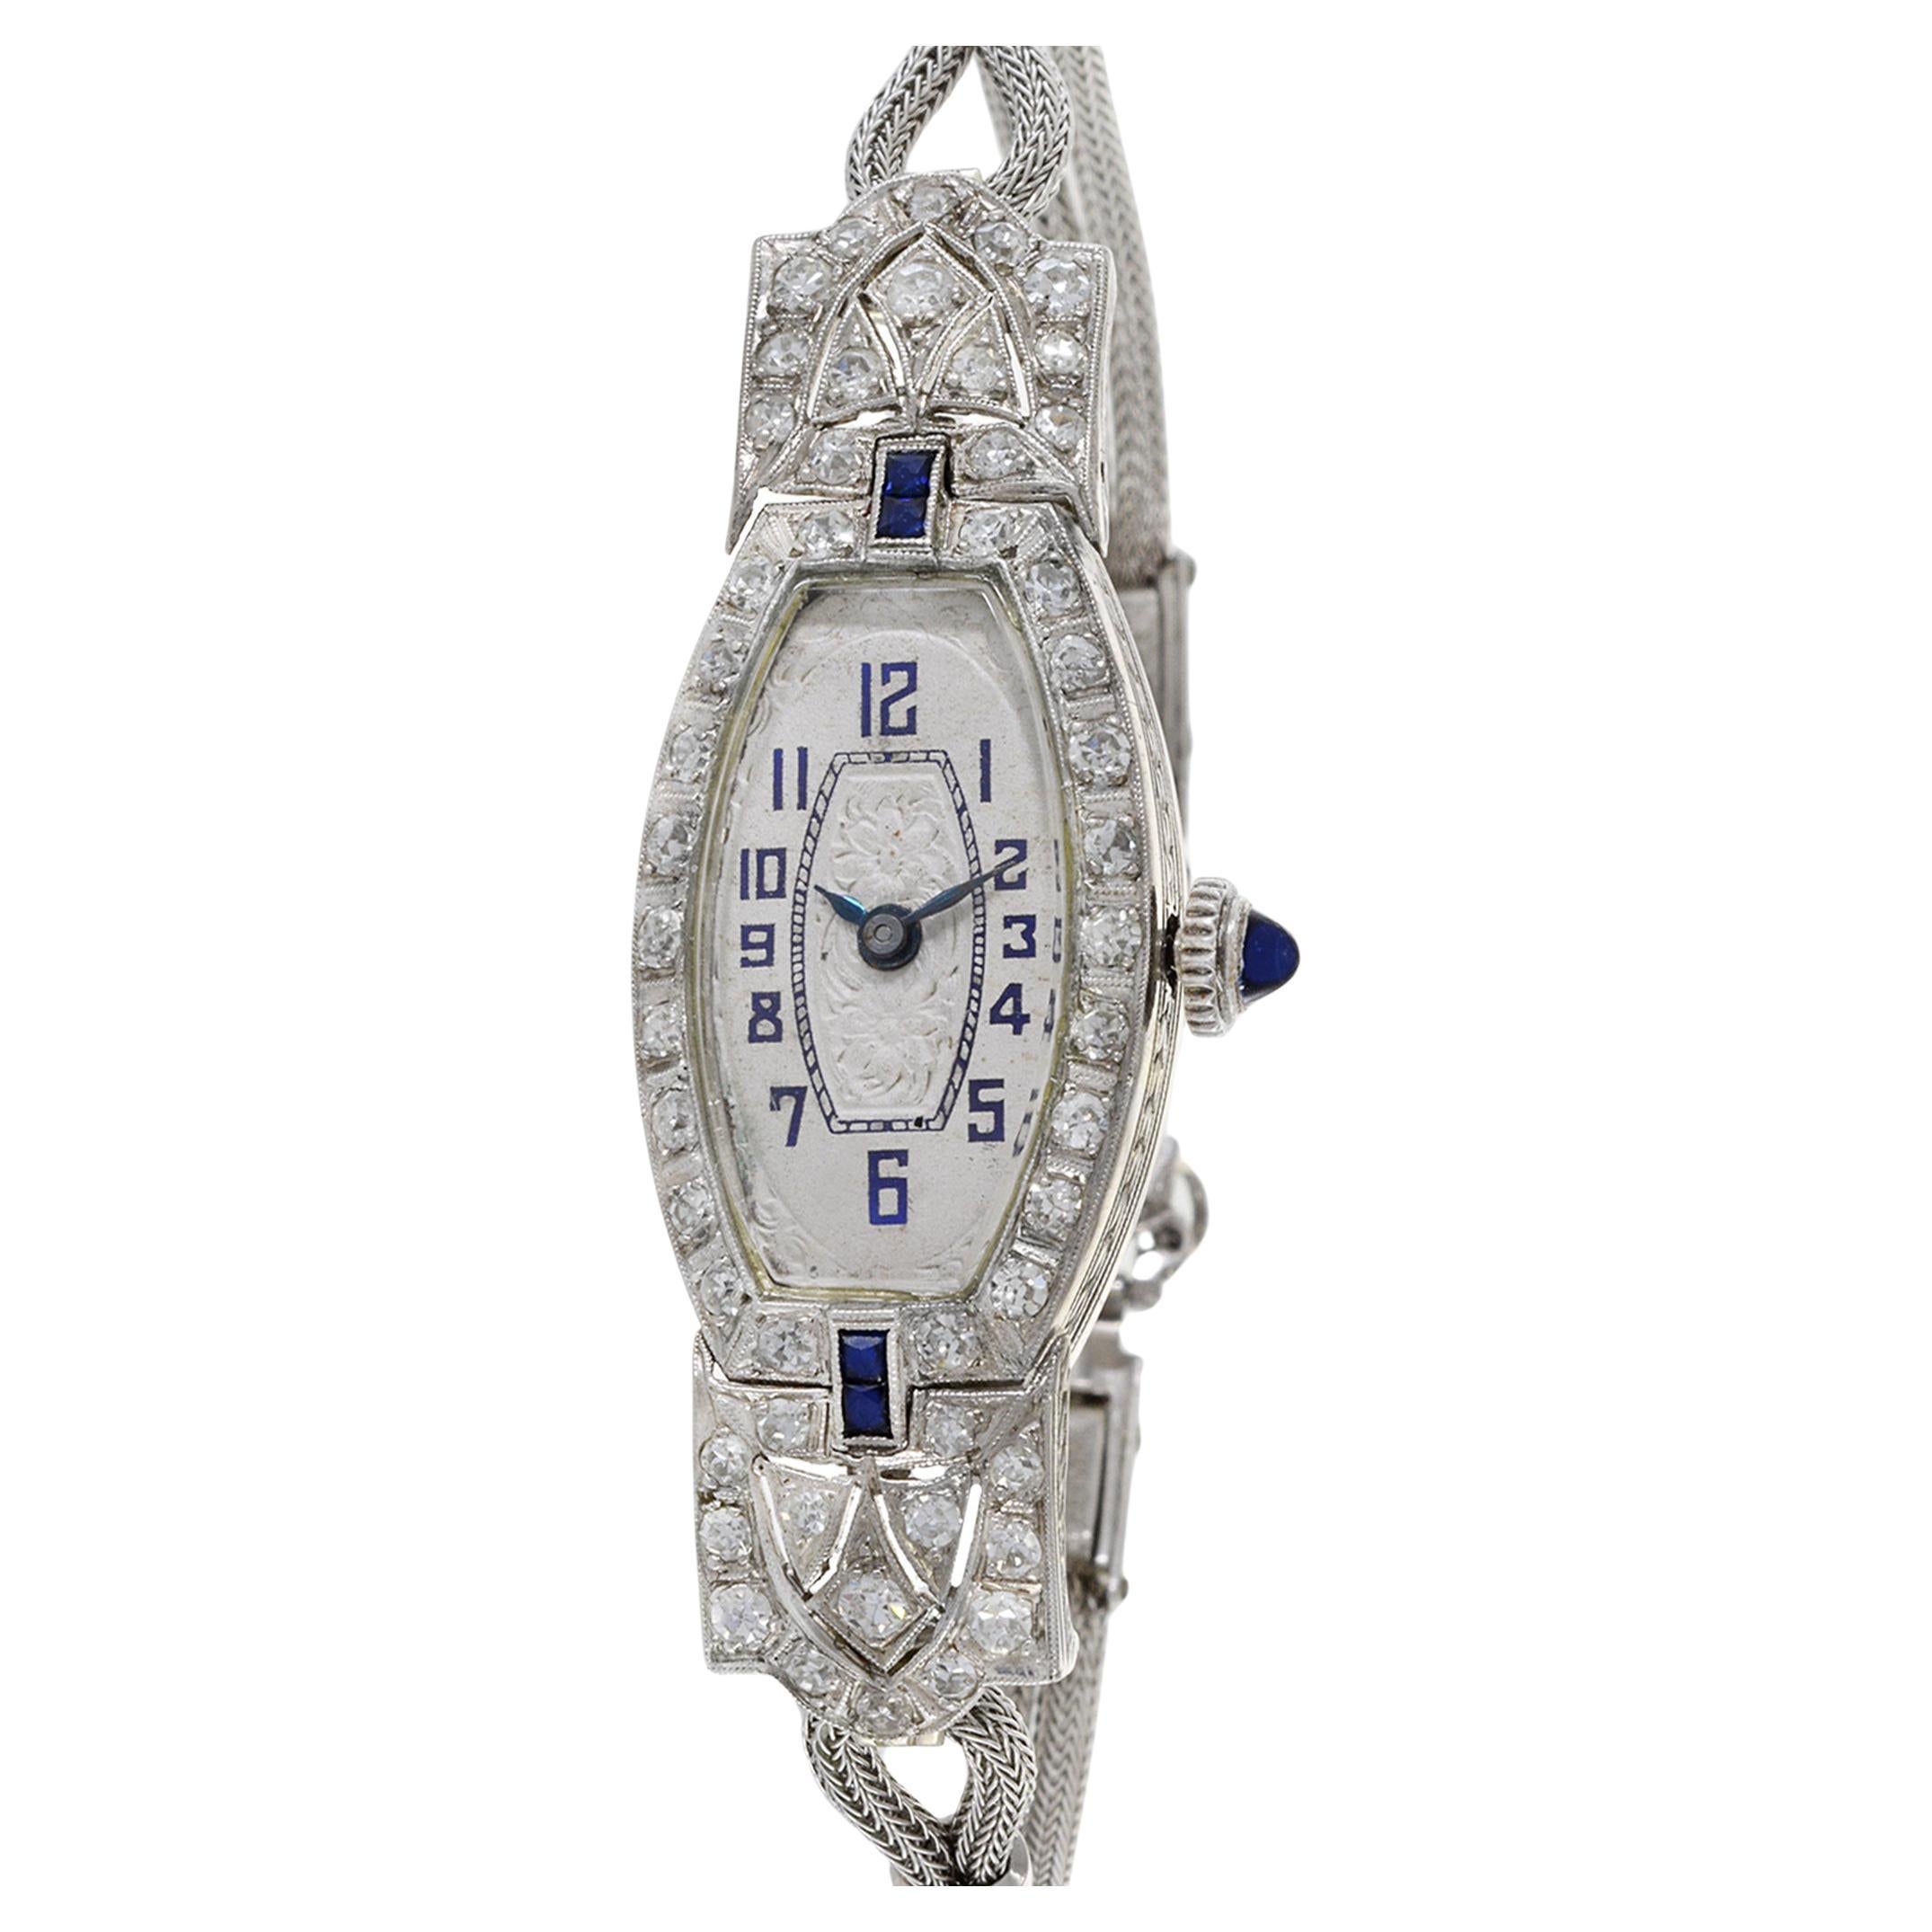 Nerny Platinum Cocktail Watch With Diamonds and Sapphires For Sale